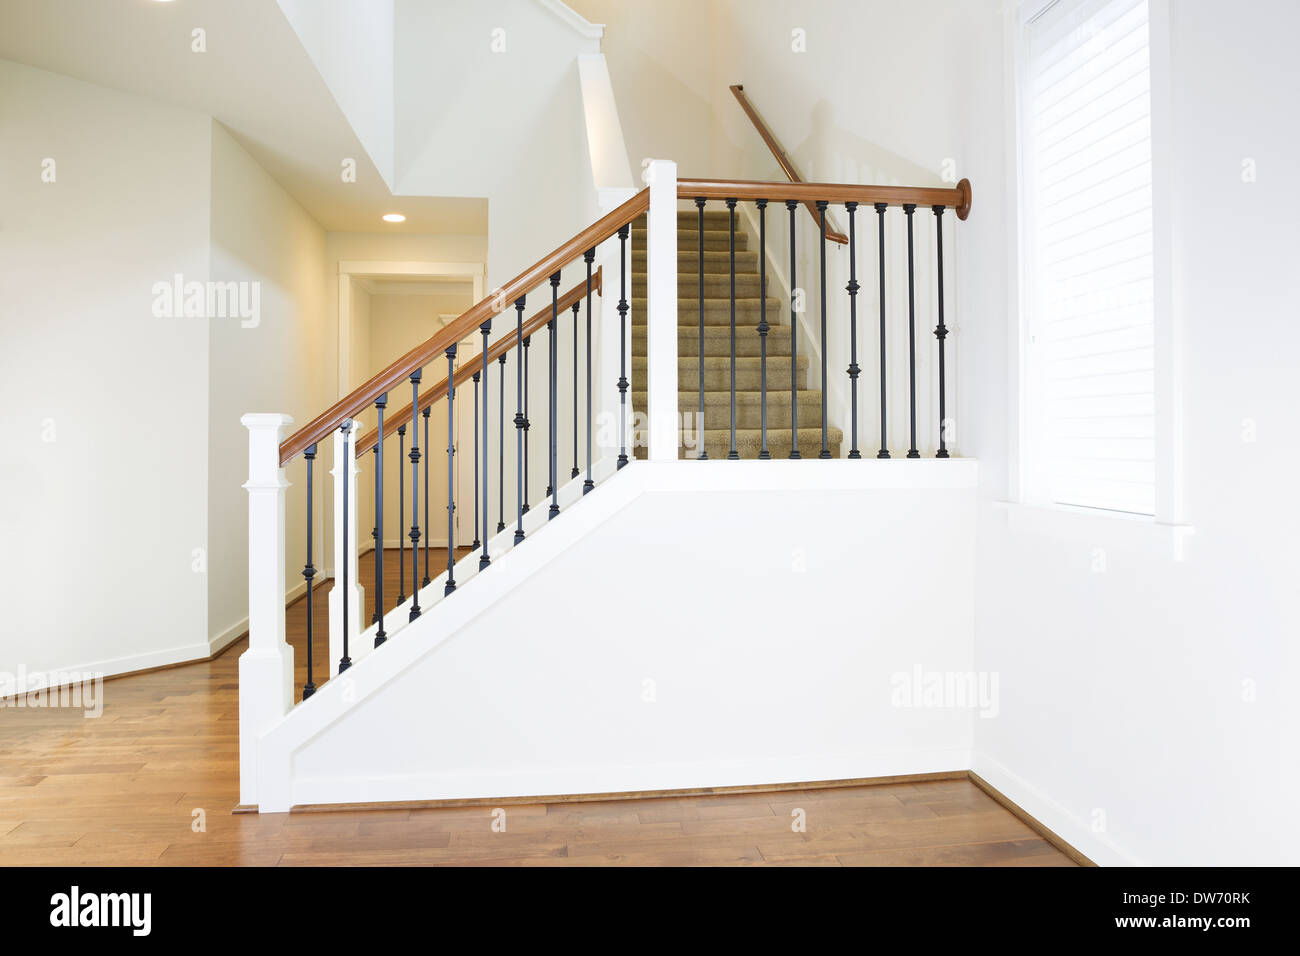 Horizontal photo of residential hard wooden floors and custom staircase made of iron and wood railing with carpet on steps Stock Photo